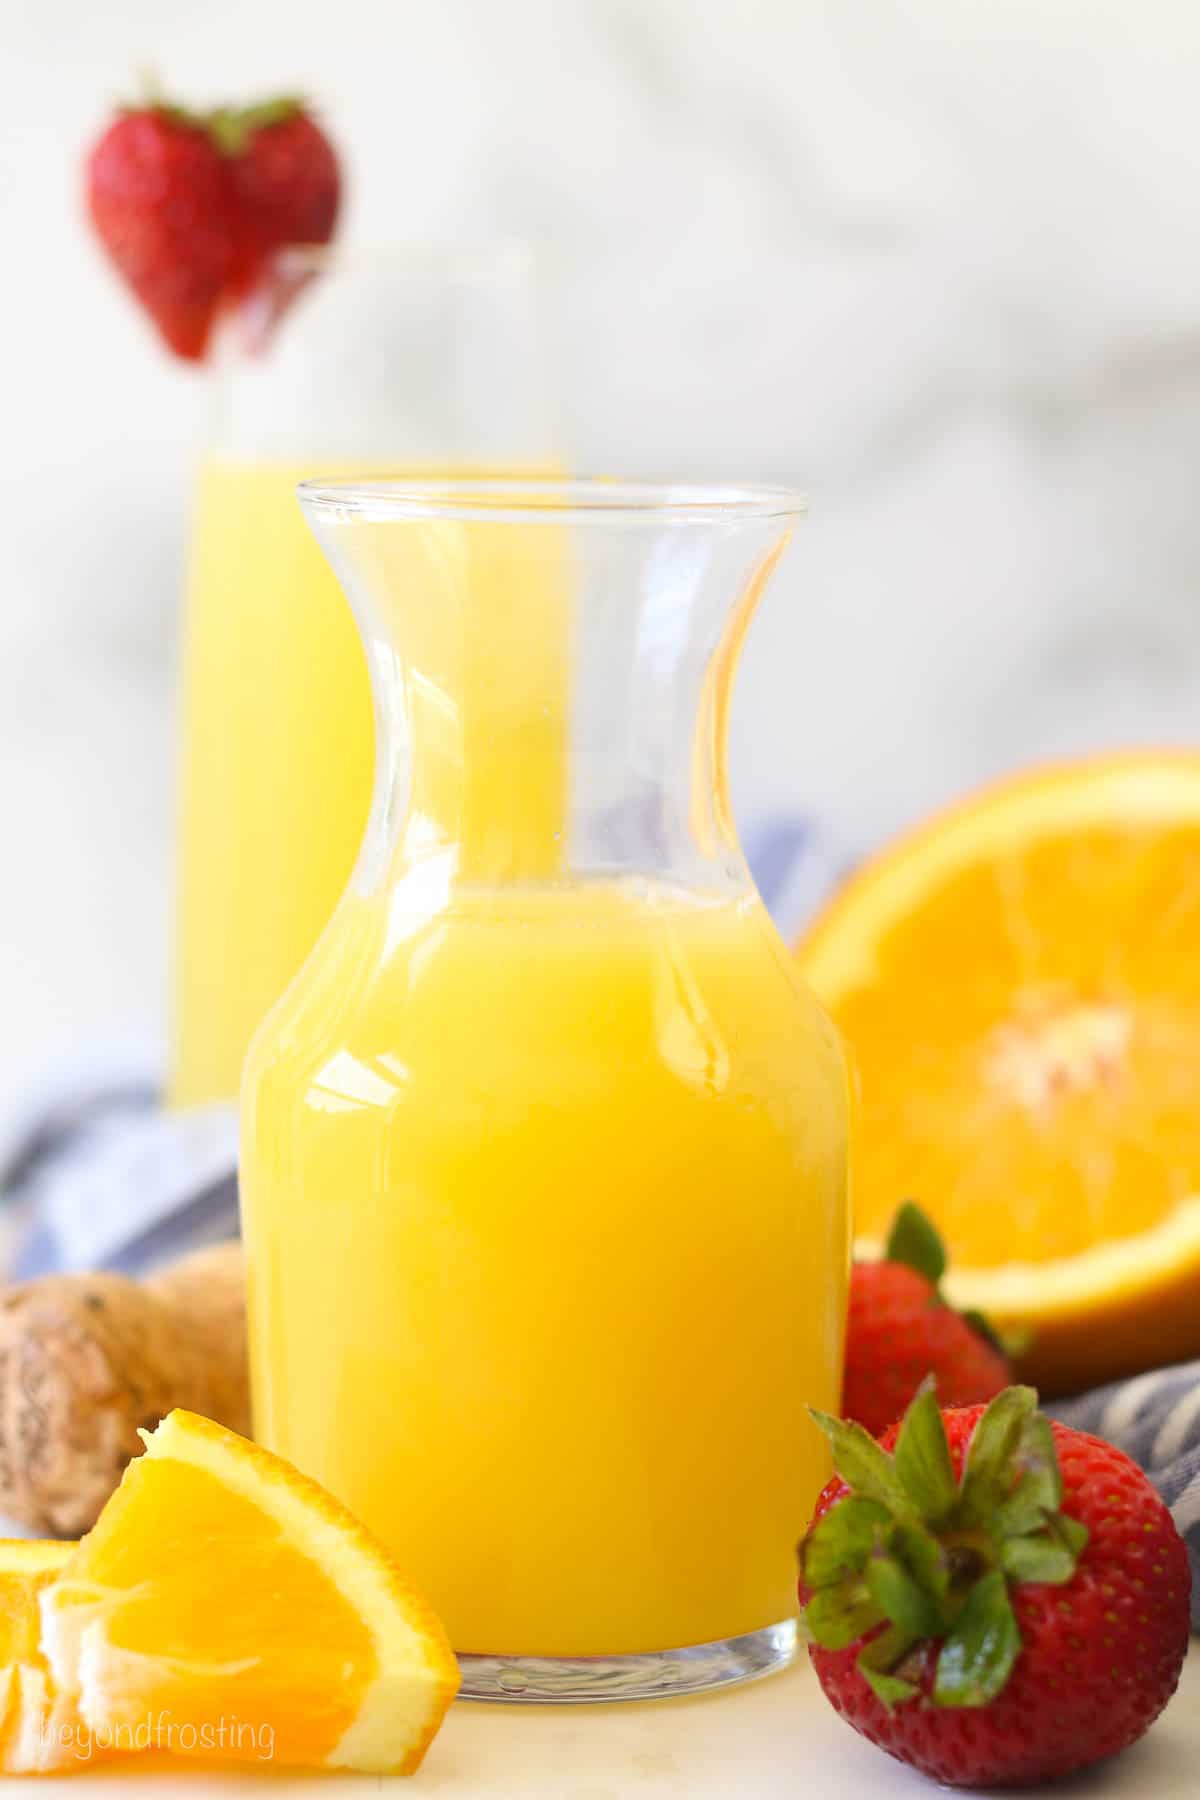 a small pitcher of orange juice surrounded by sliced oranges and strawberries